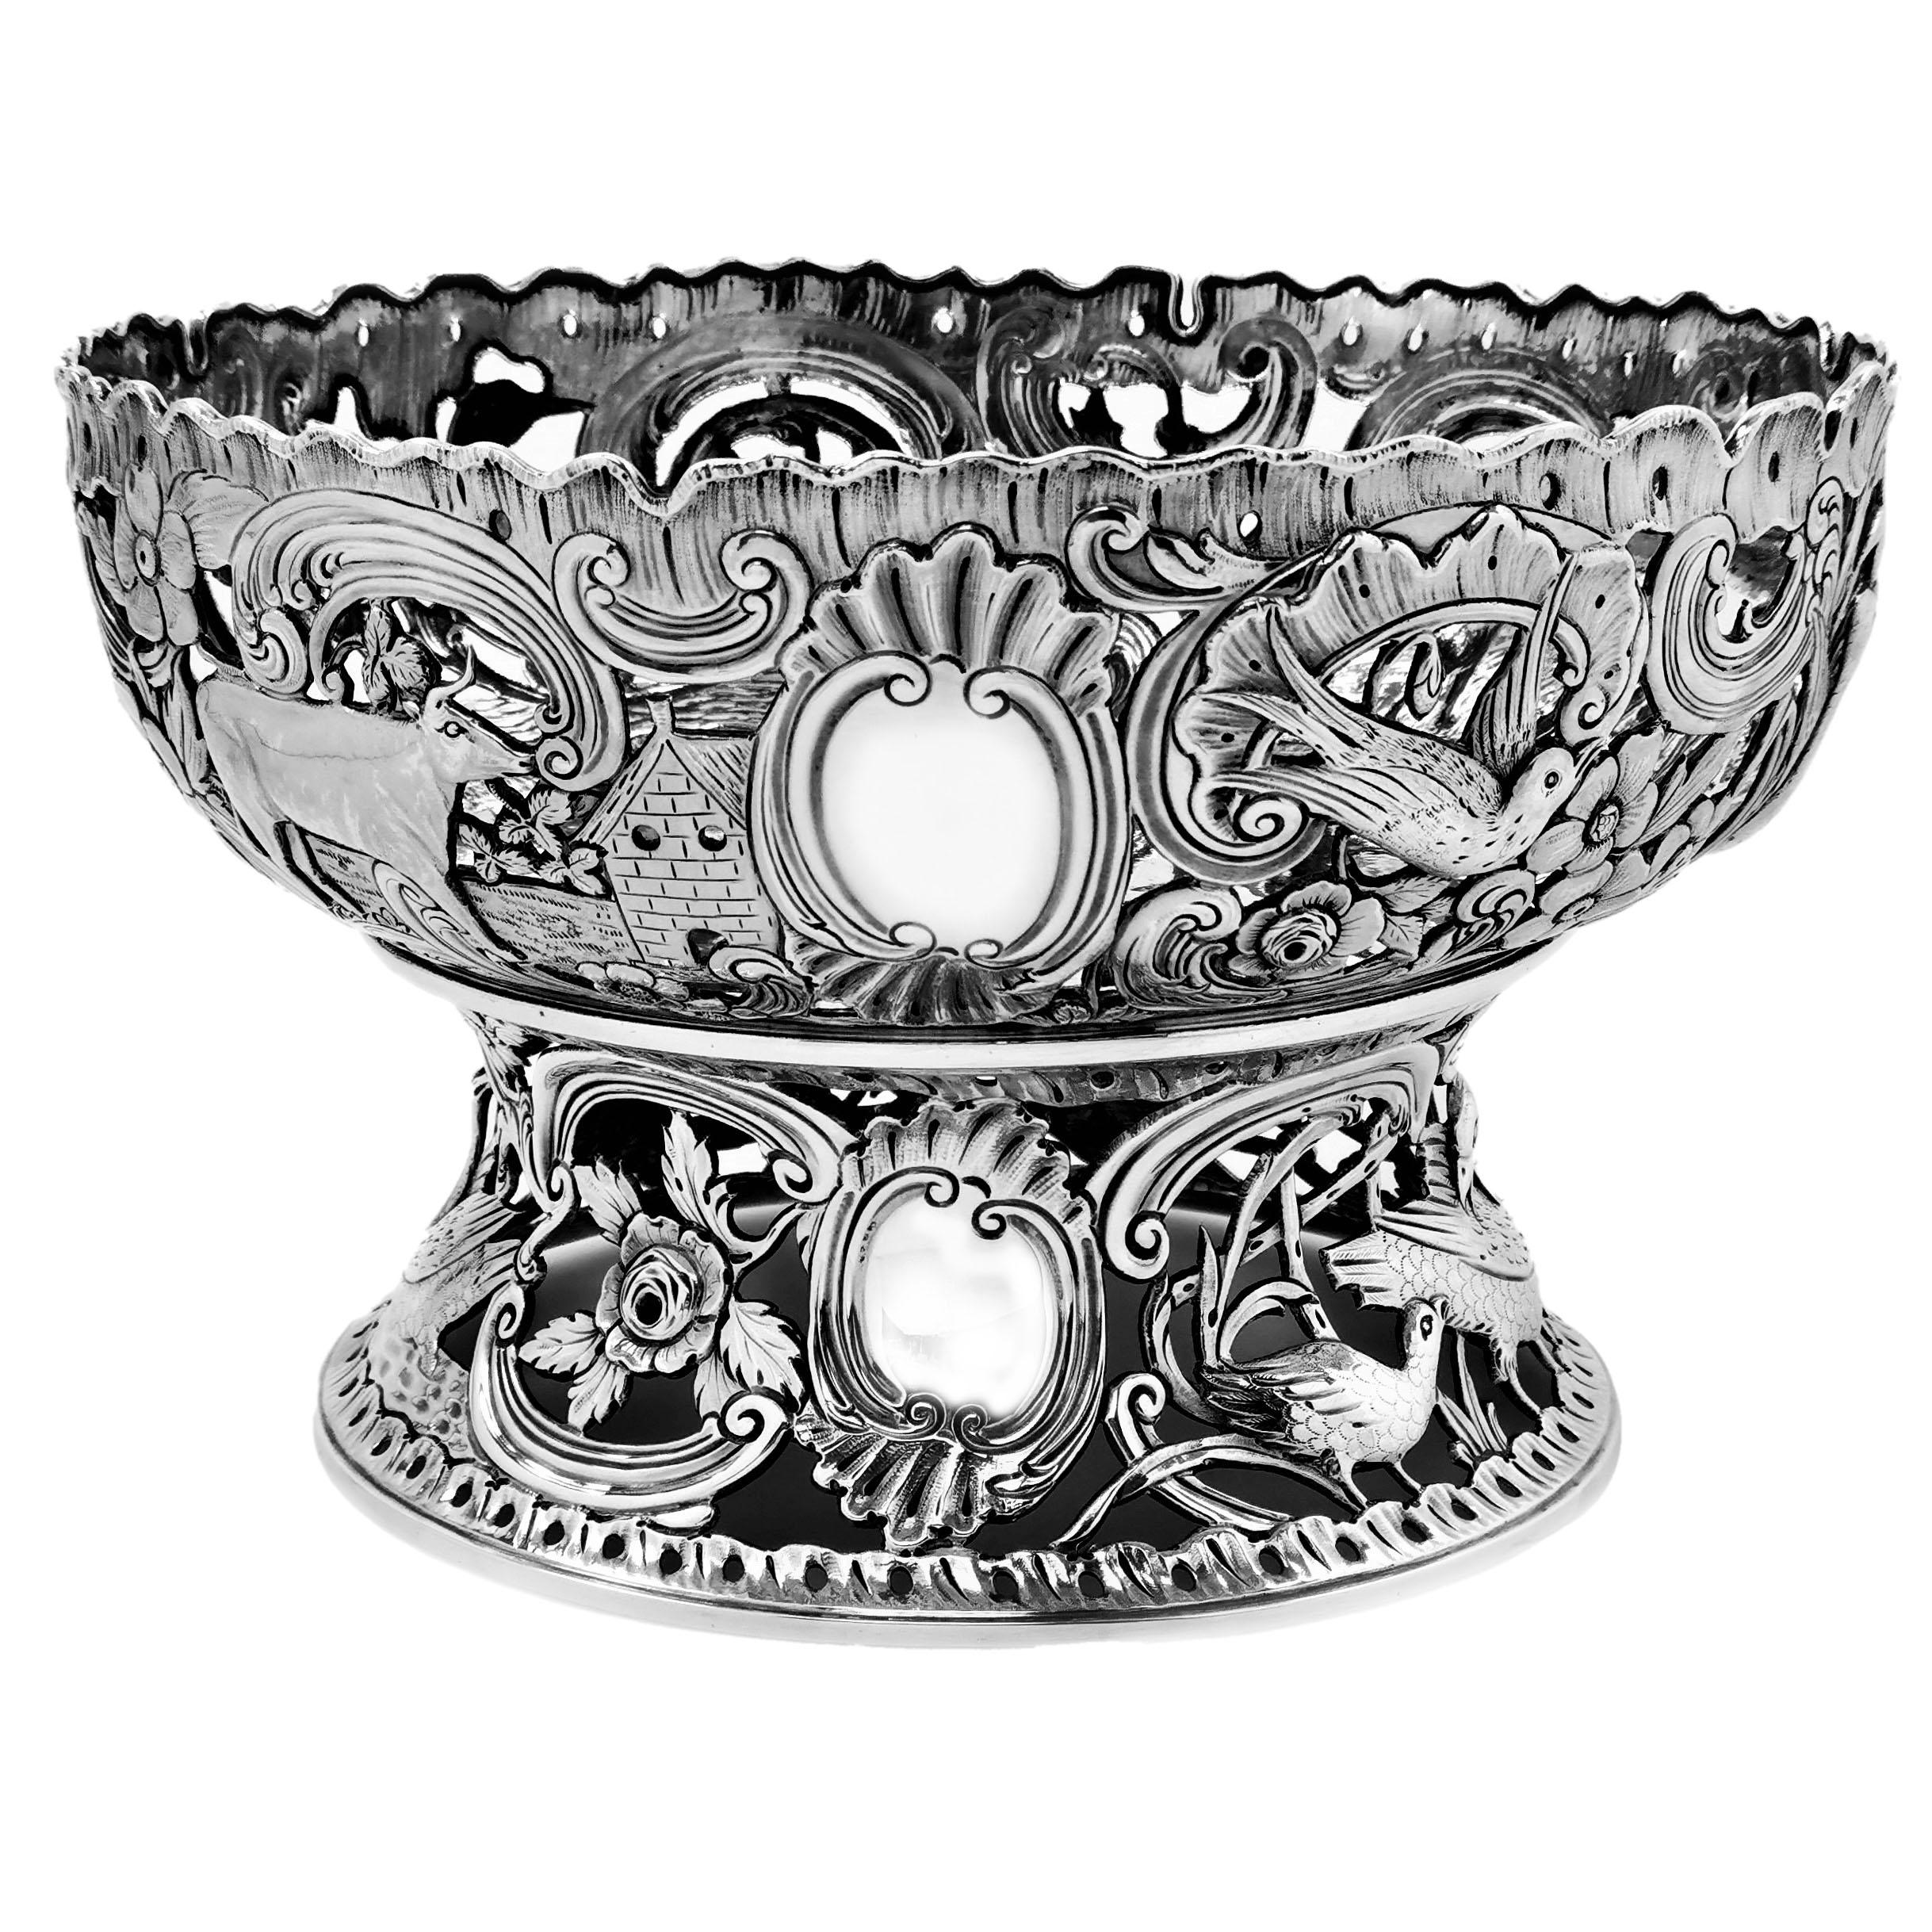 A magnificent Antique Victorian Silver Dish Ring with matching Bowl / Dish created in the typical antique Irish Georgian Silver Dish Rings. This a particularly fine example with a gorgeous, detailed chased and pierced scenes on both the Dish Ring